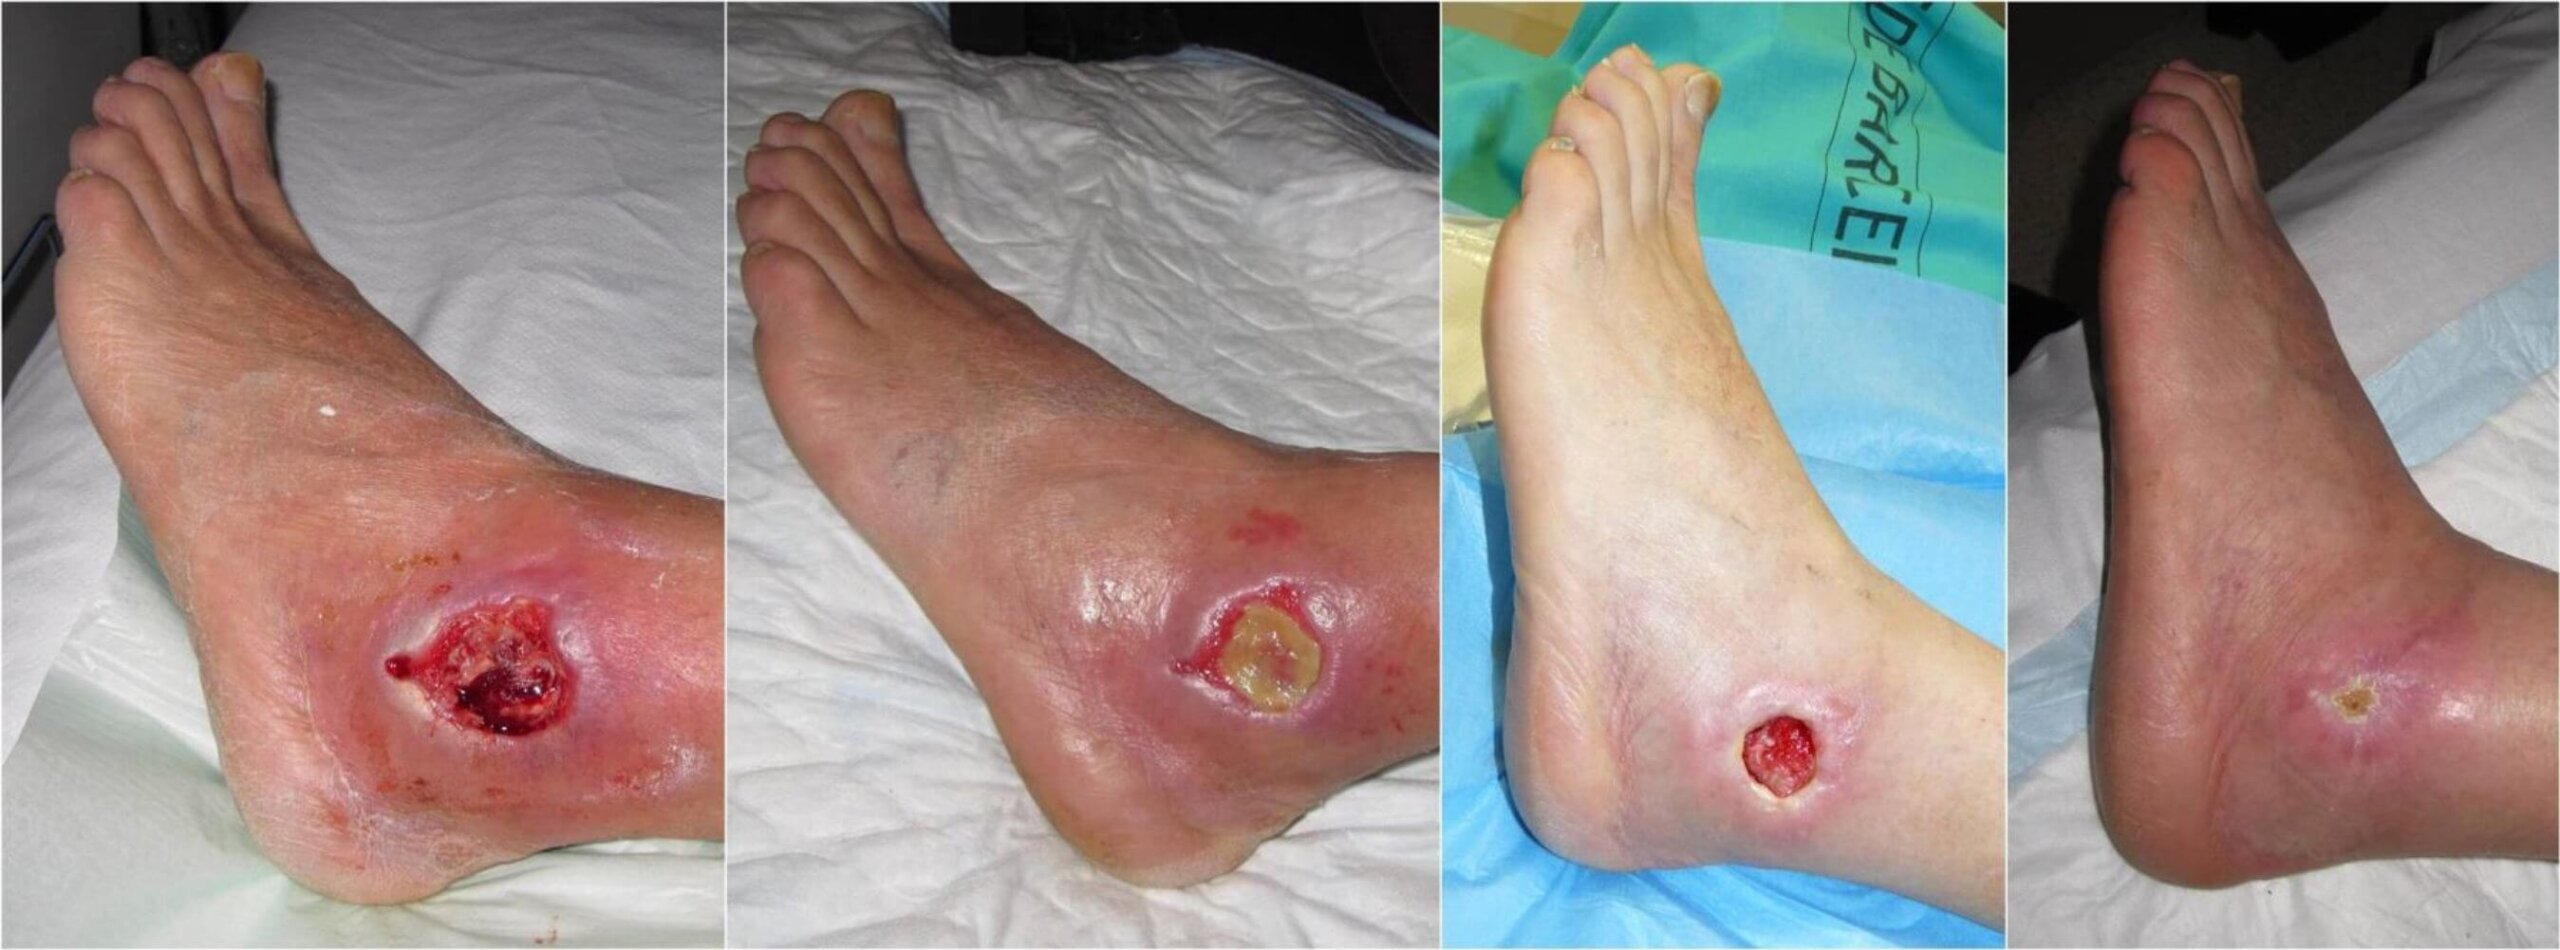 Diabetic-foot-treatment-with-stem-cells